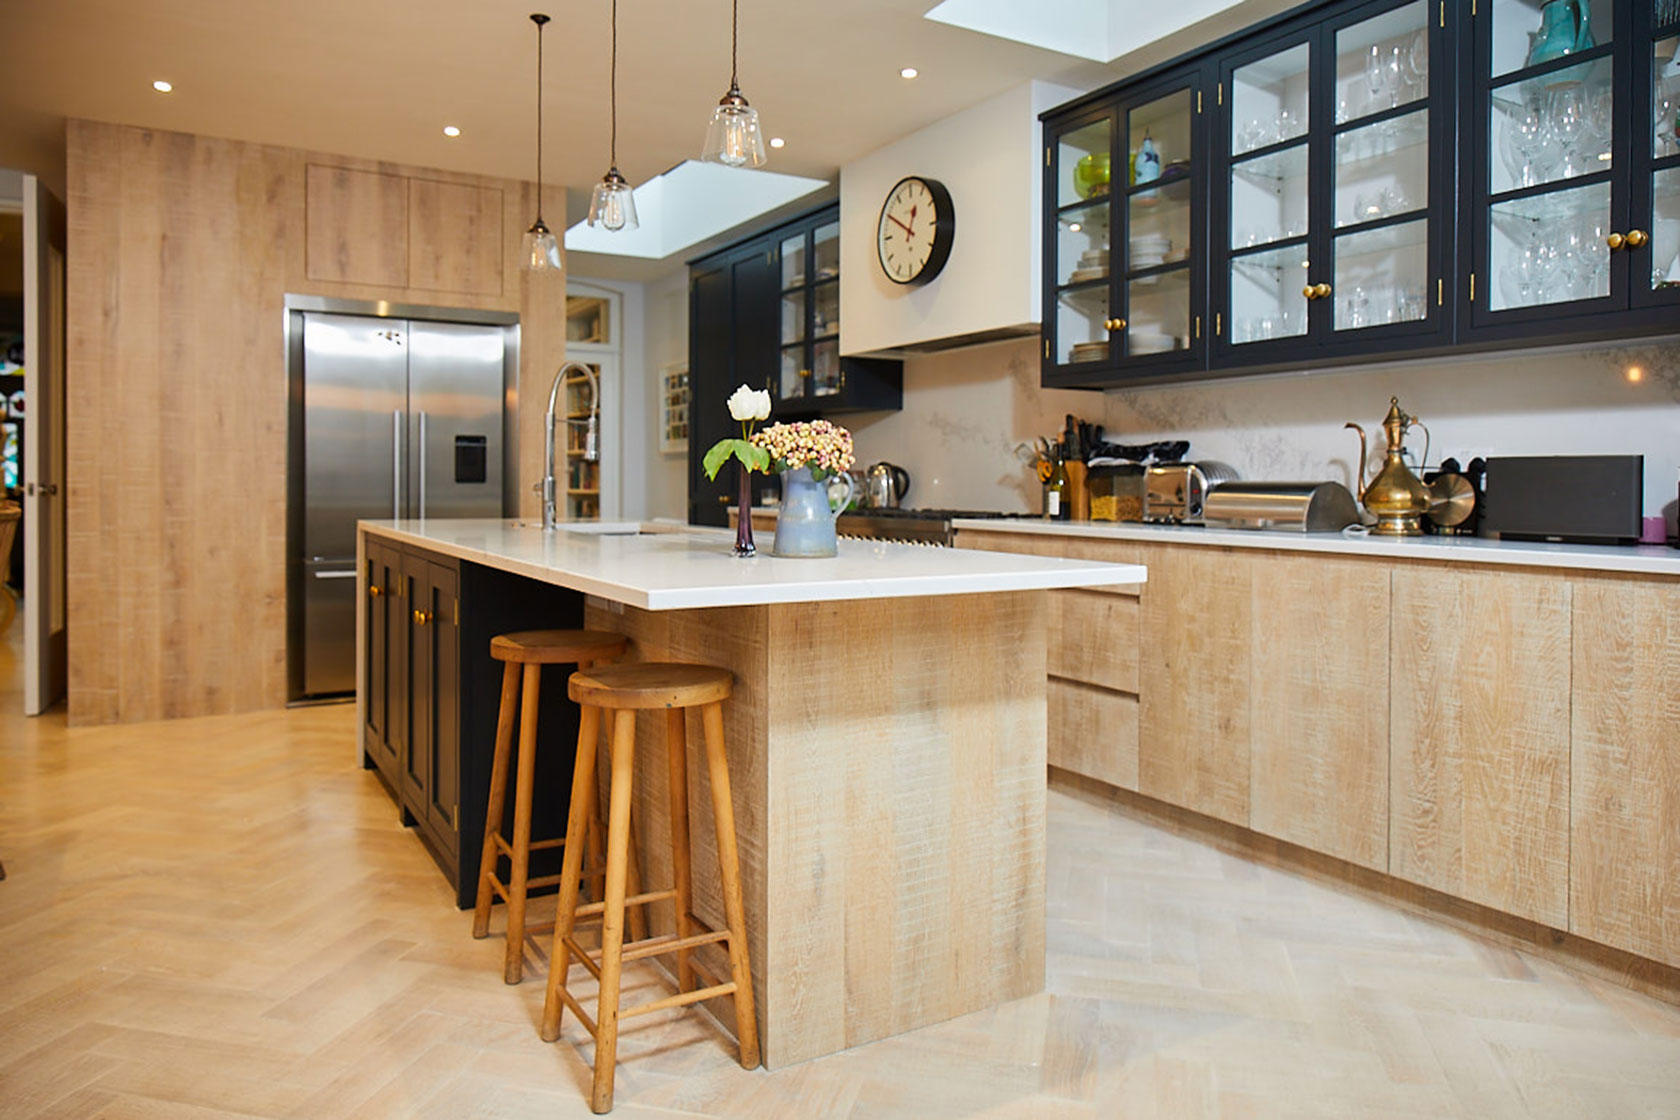 Bespoke kitchen with dark blue traditional cabinets and limed oak slab doors in island